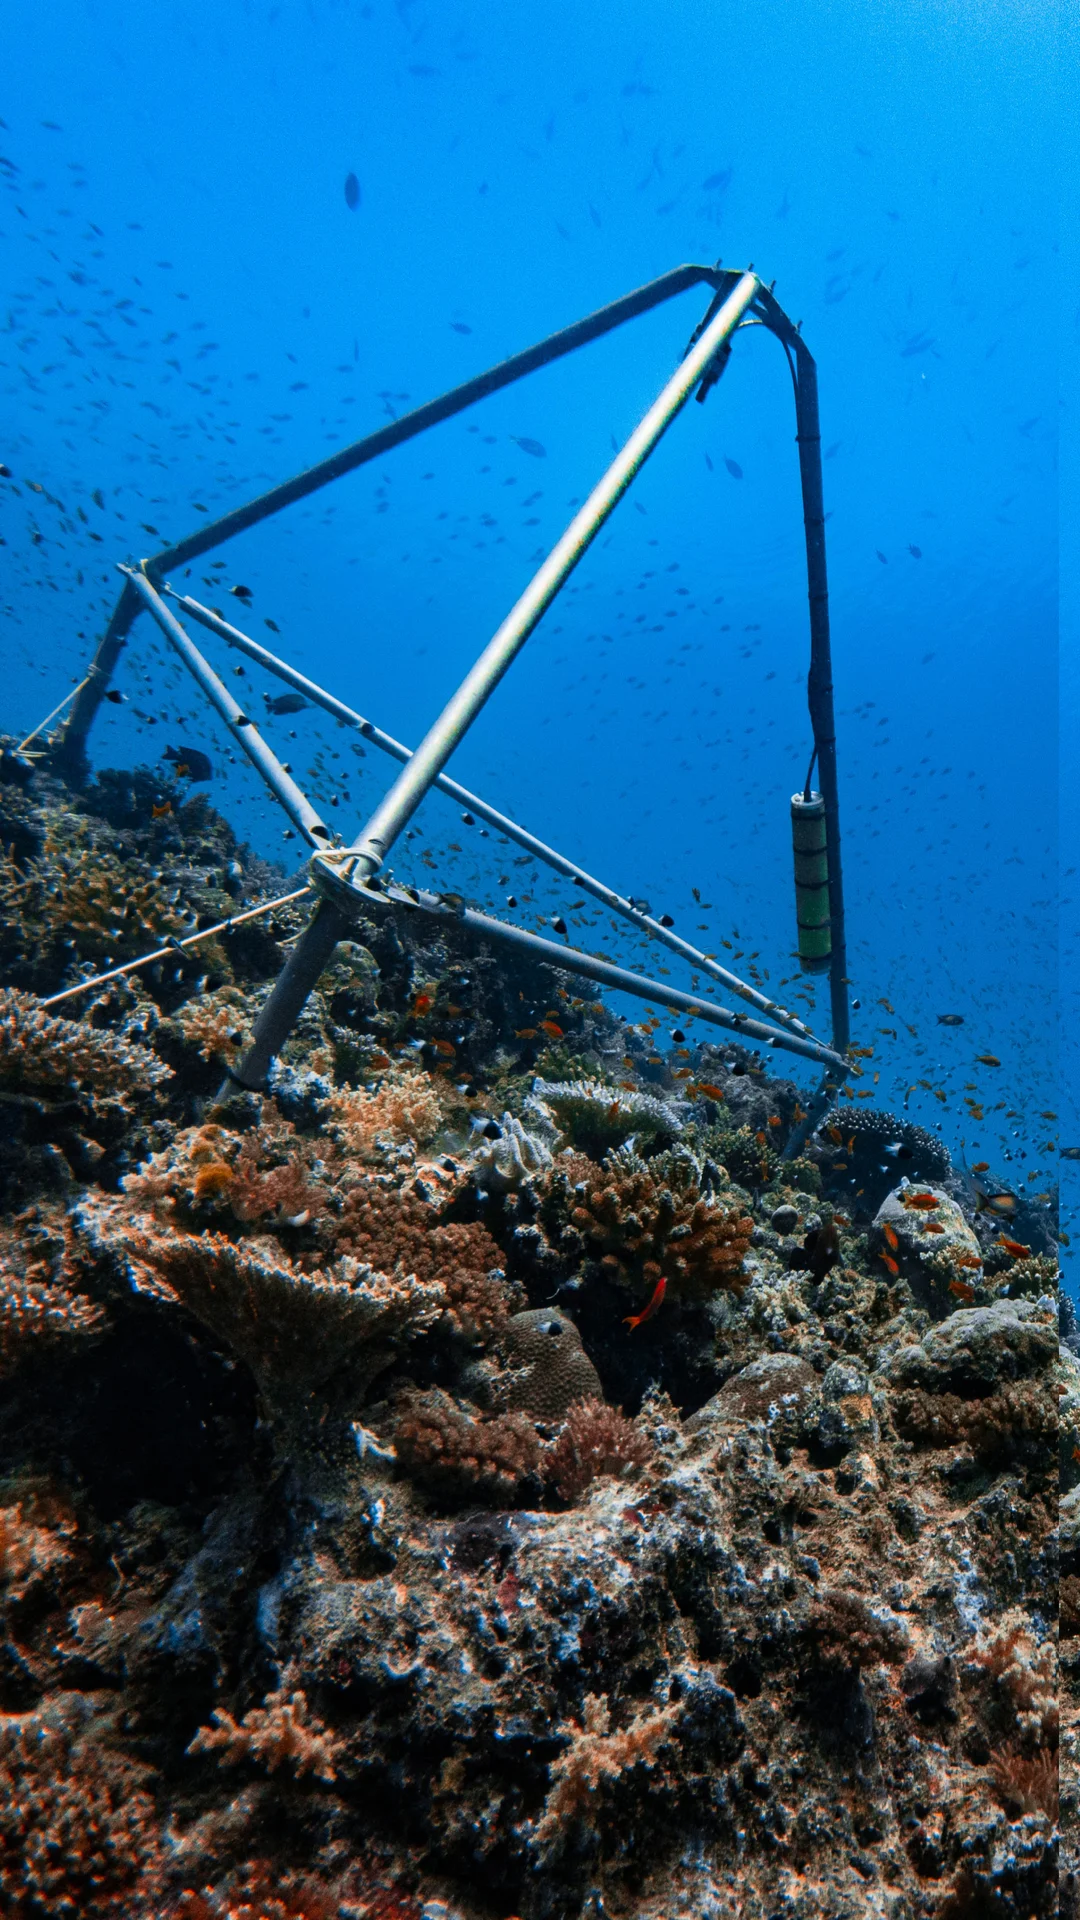 Tripod installed in the seabed with a school of fish